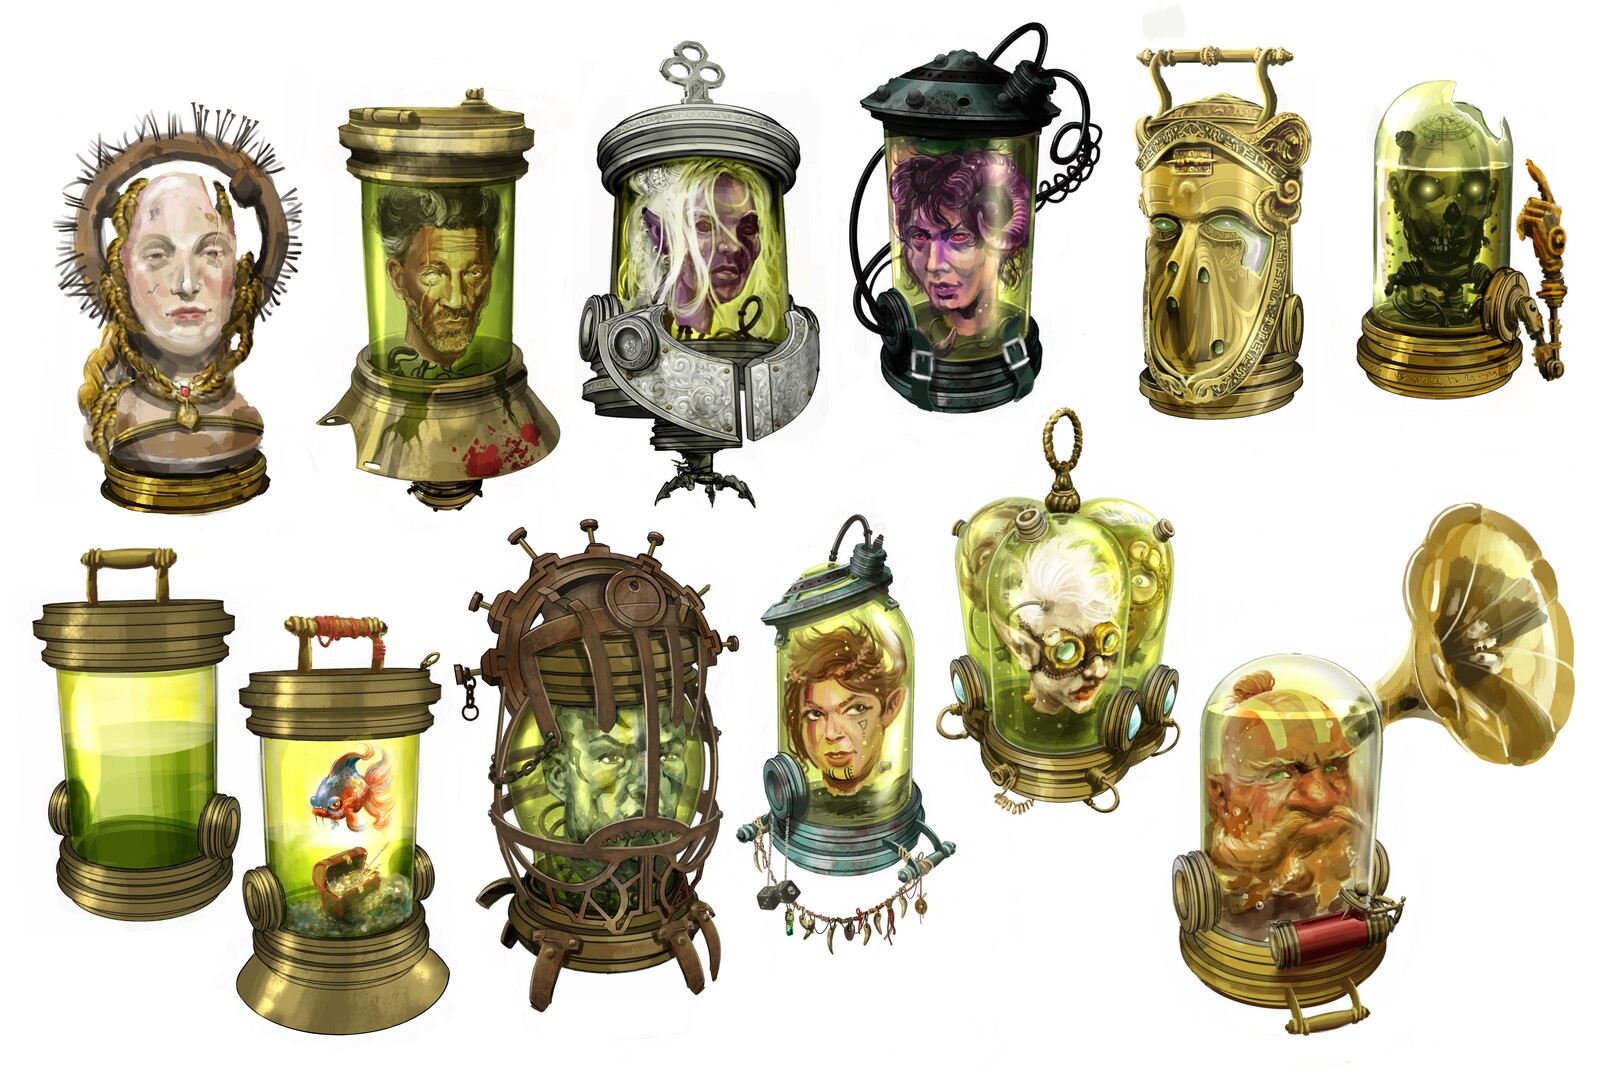 A range of heads in jars based on D&amp;D classes, plus some other “add on head options”.